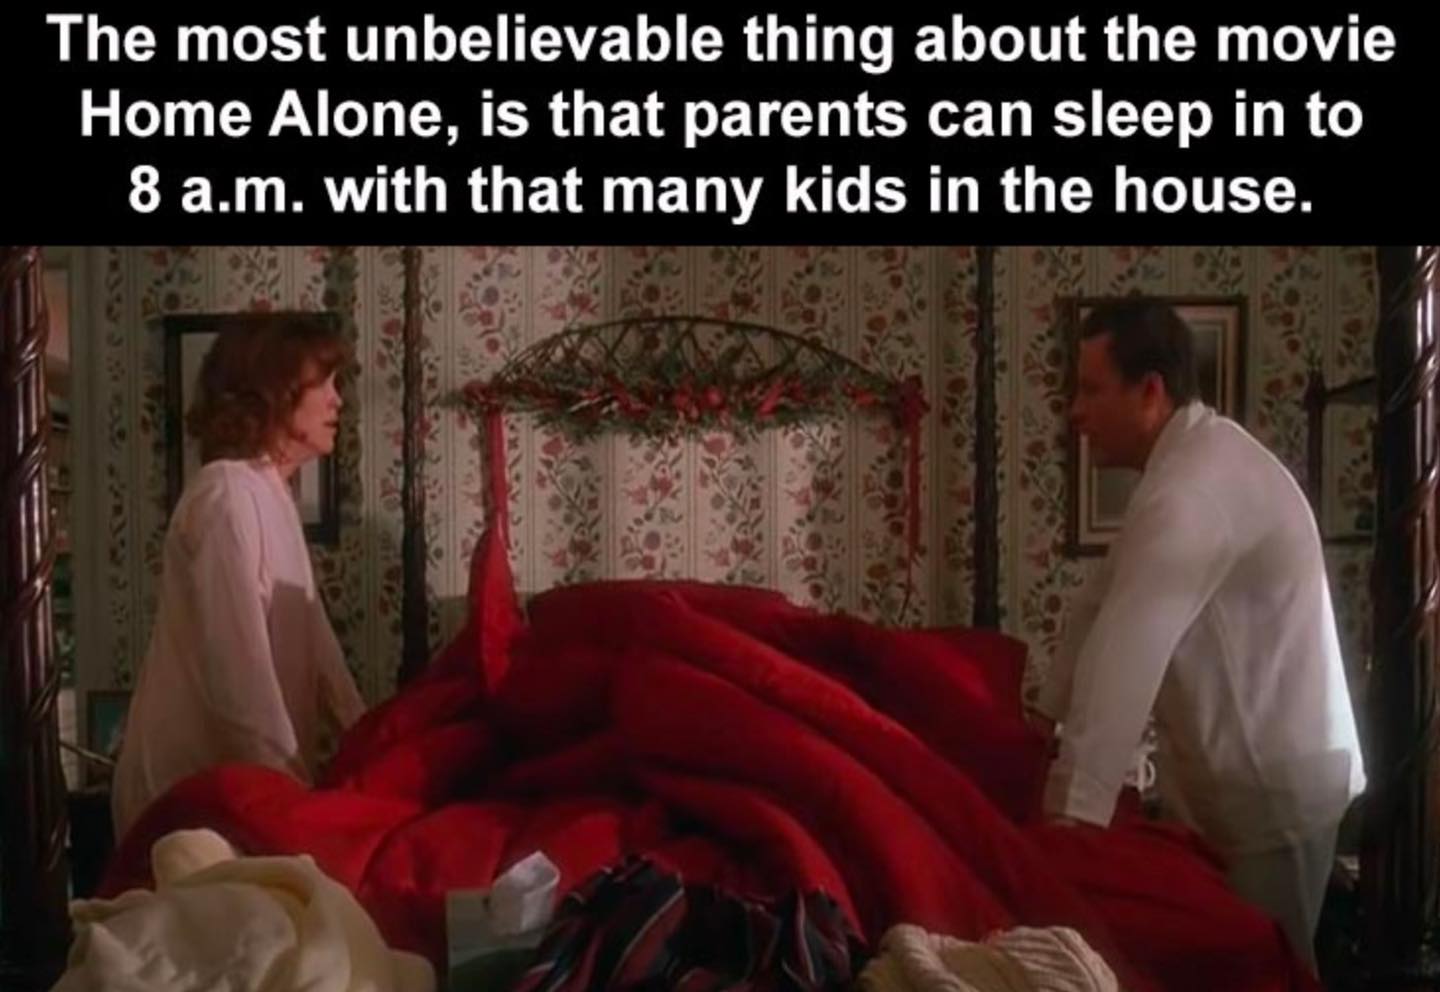 video - The most unbelievable thing about the movie Home Alone, is that parents can sleep in to 8 a.m. with that many kids in the house.